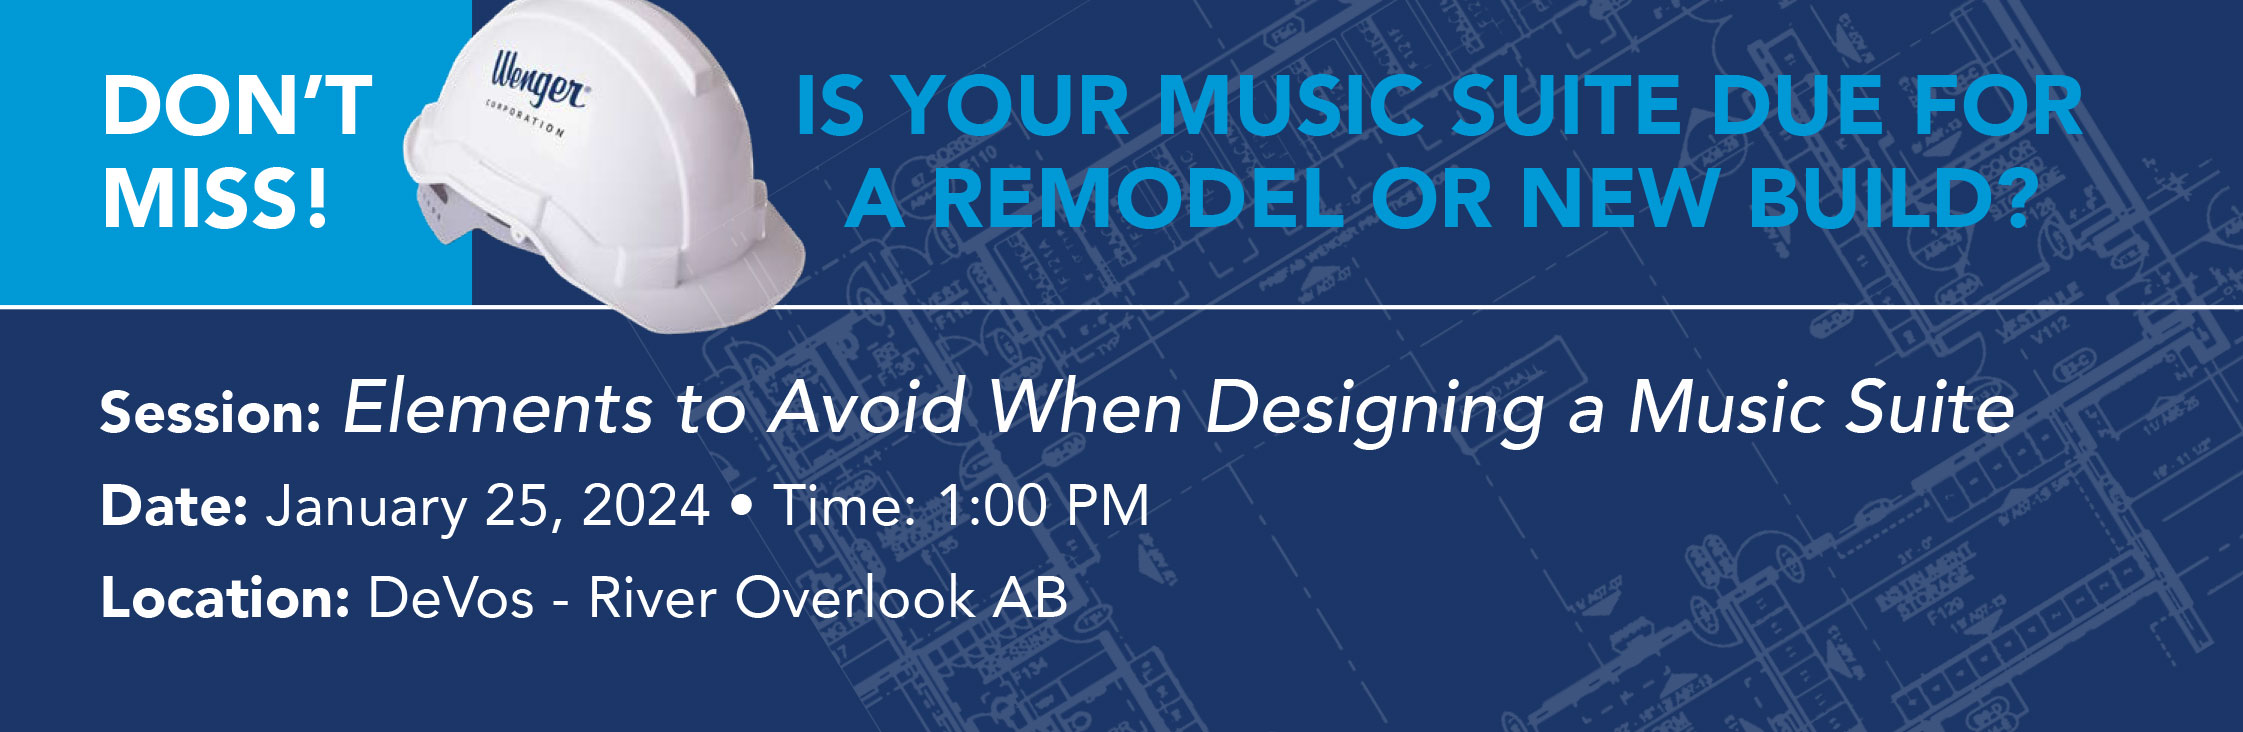 IS YOUR MUSIC SUITE DUE FOR A REMODEL OR NEW BUILD?